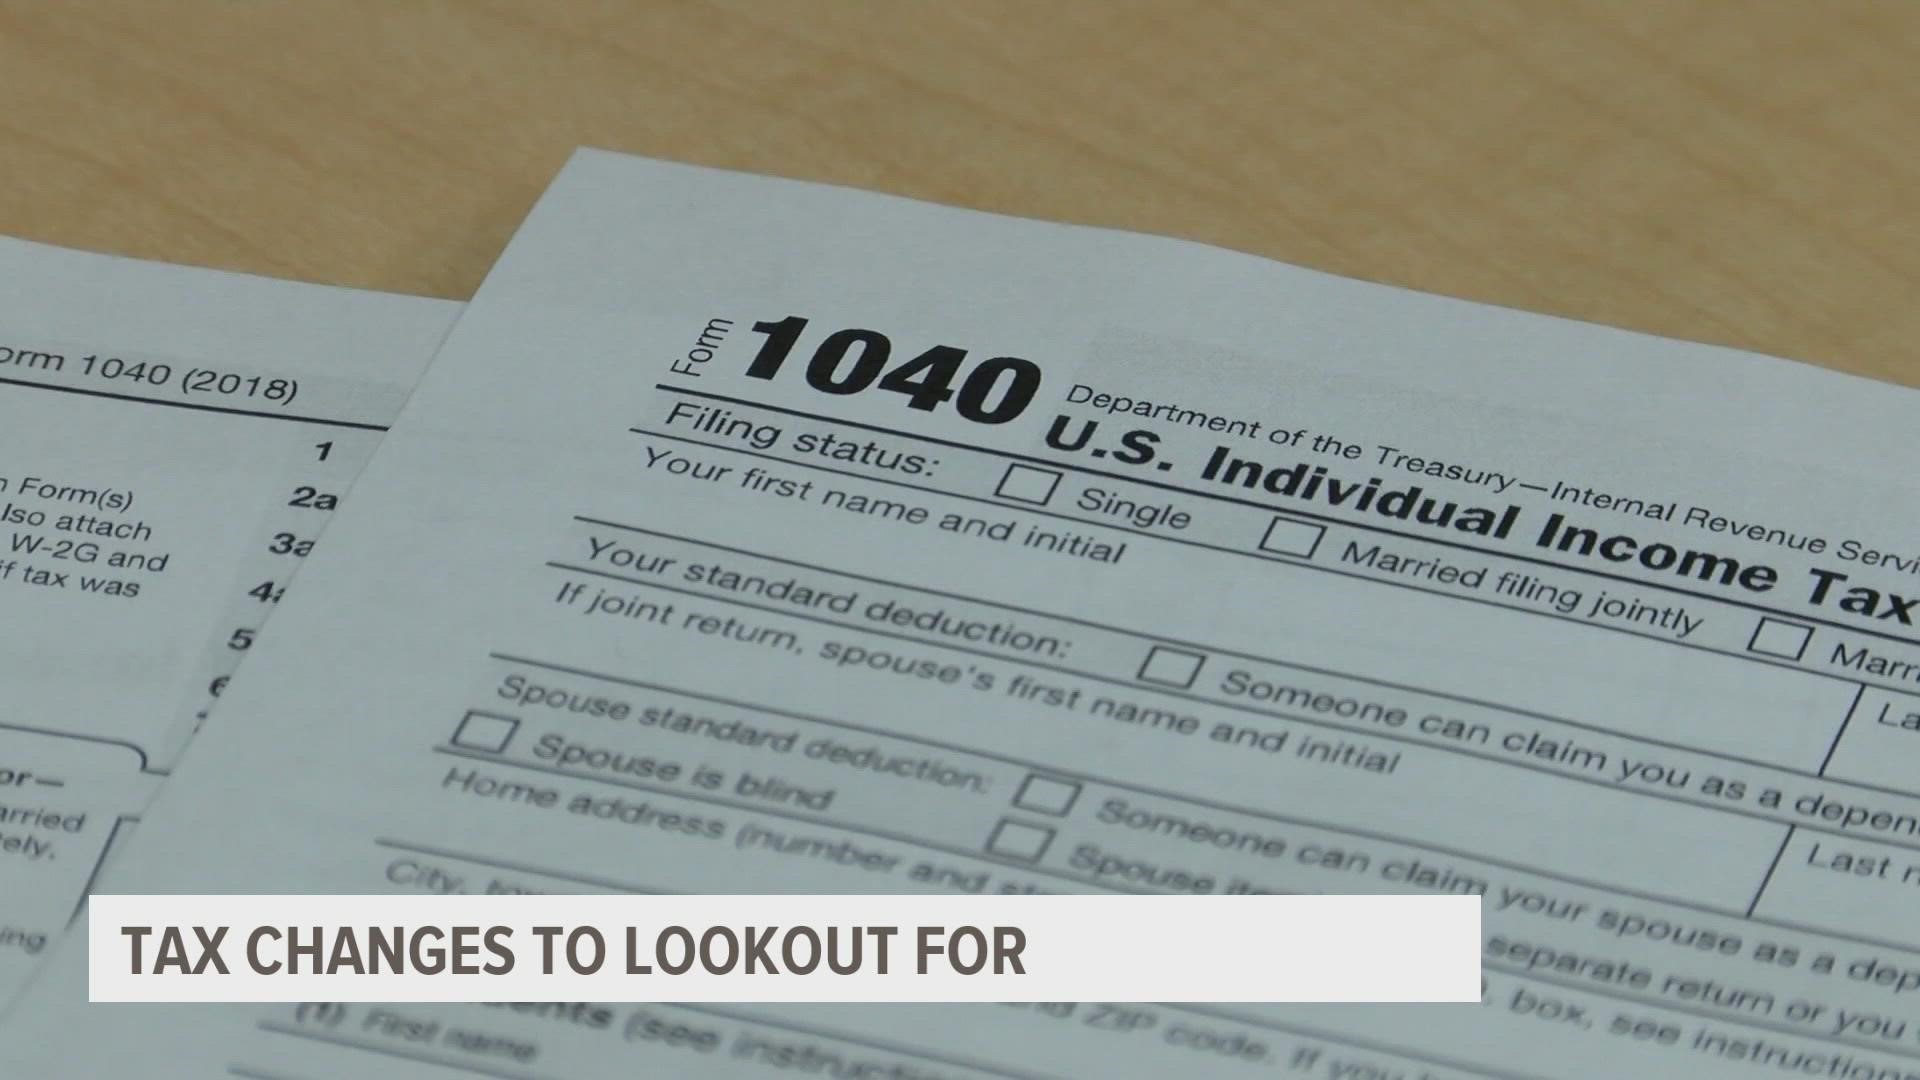 A financial professional gives tips on changes people should be aware of before they file their taxes.